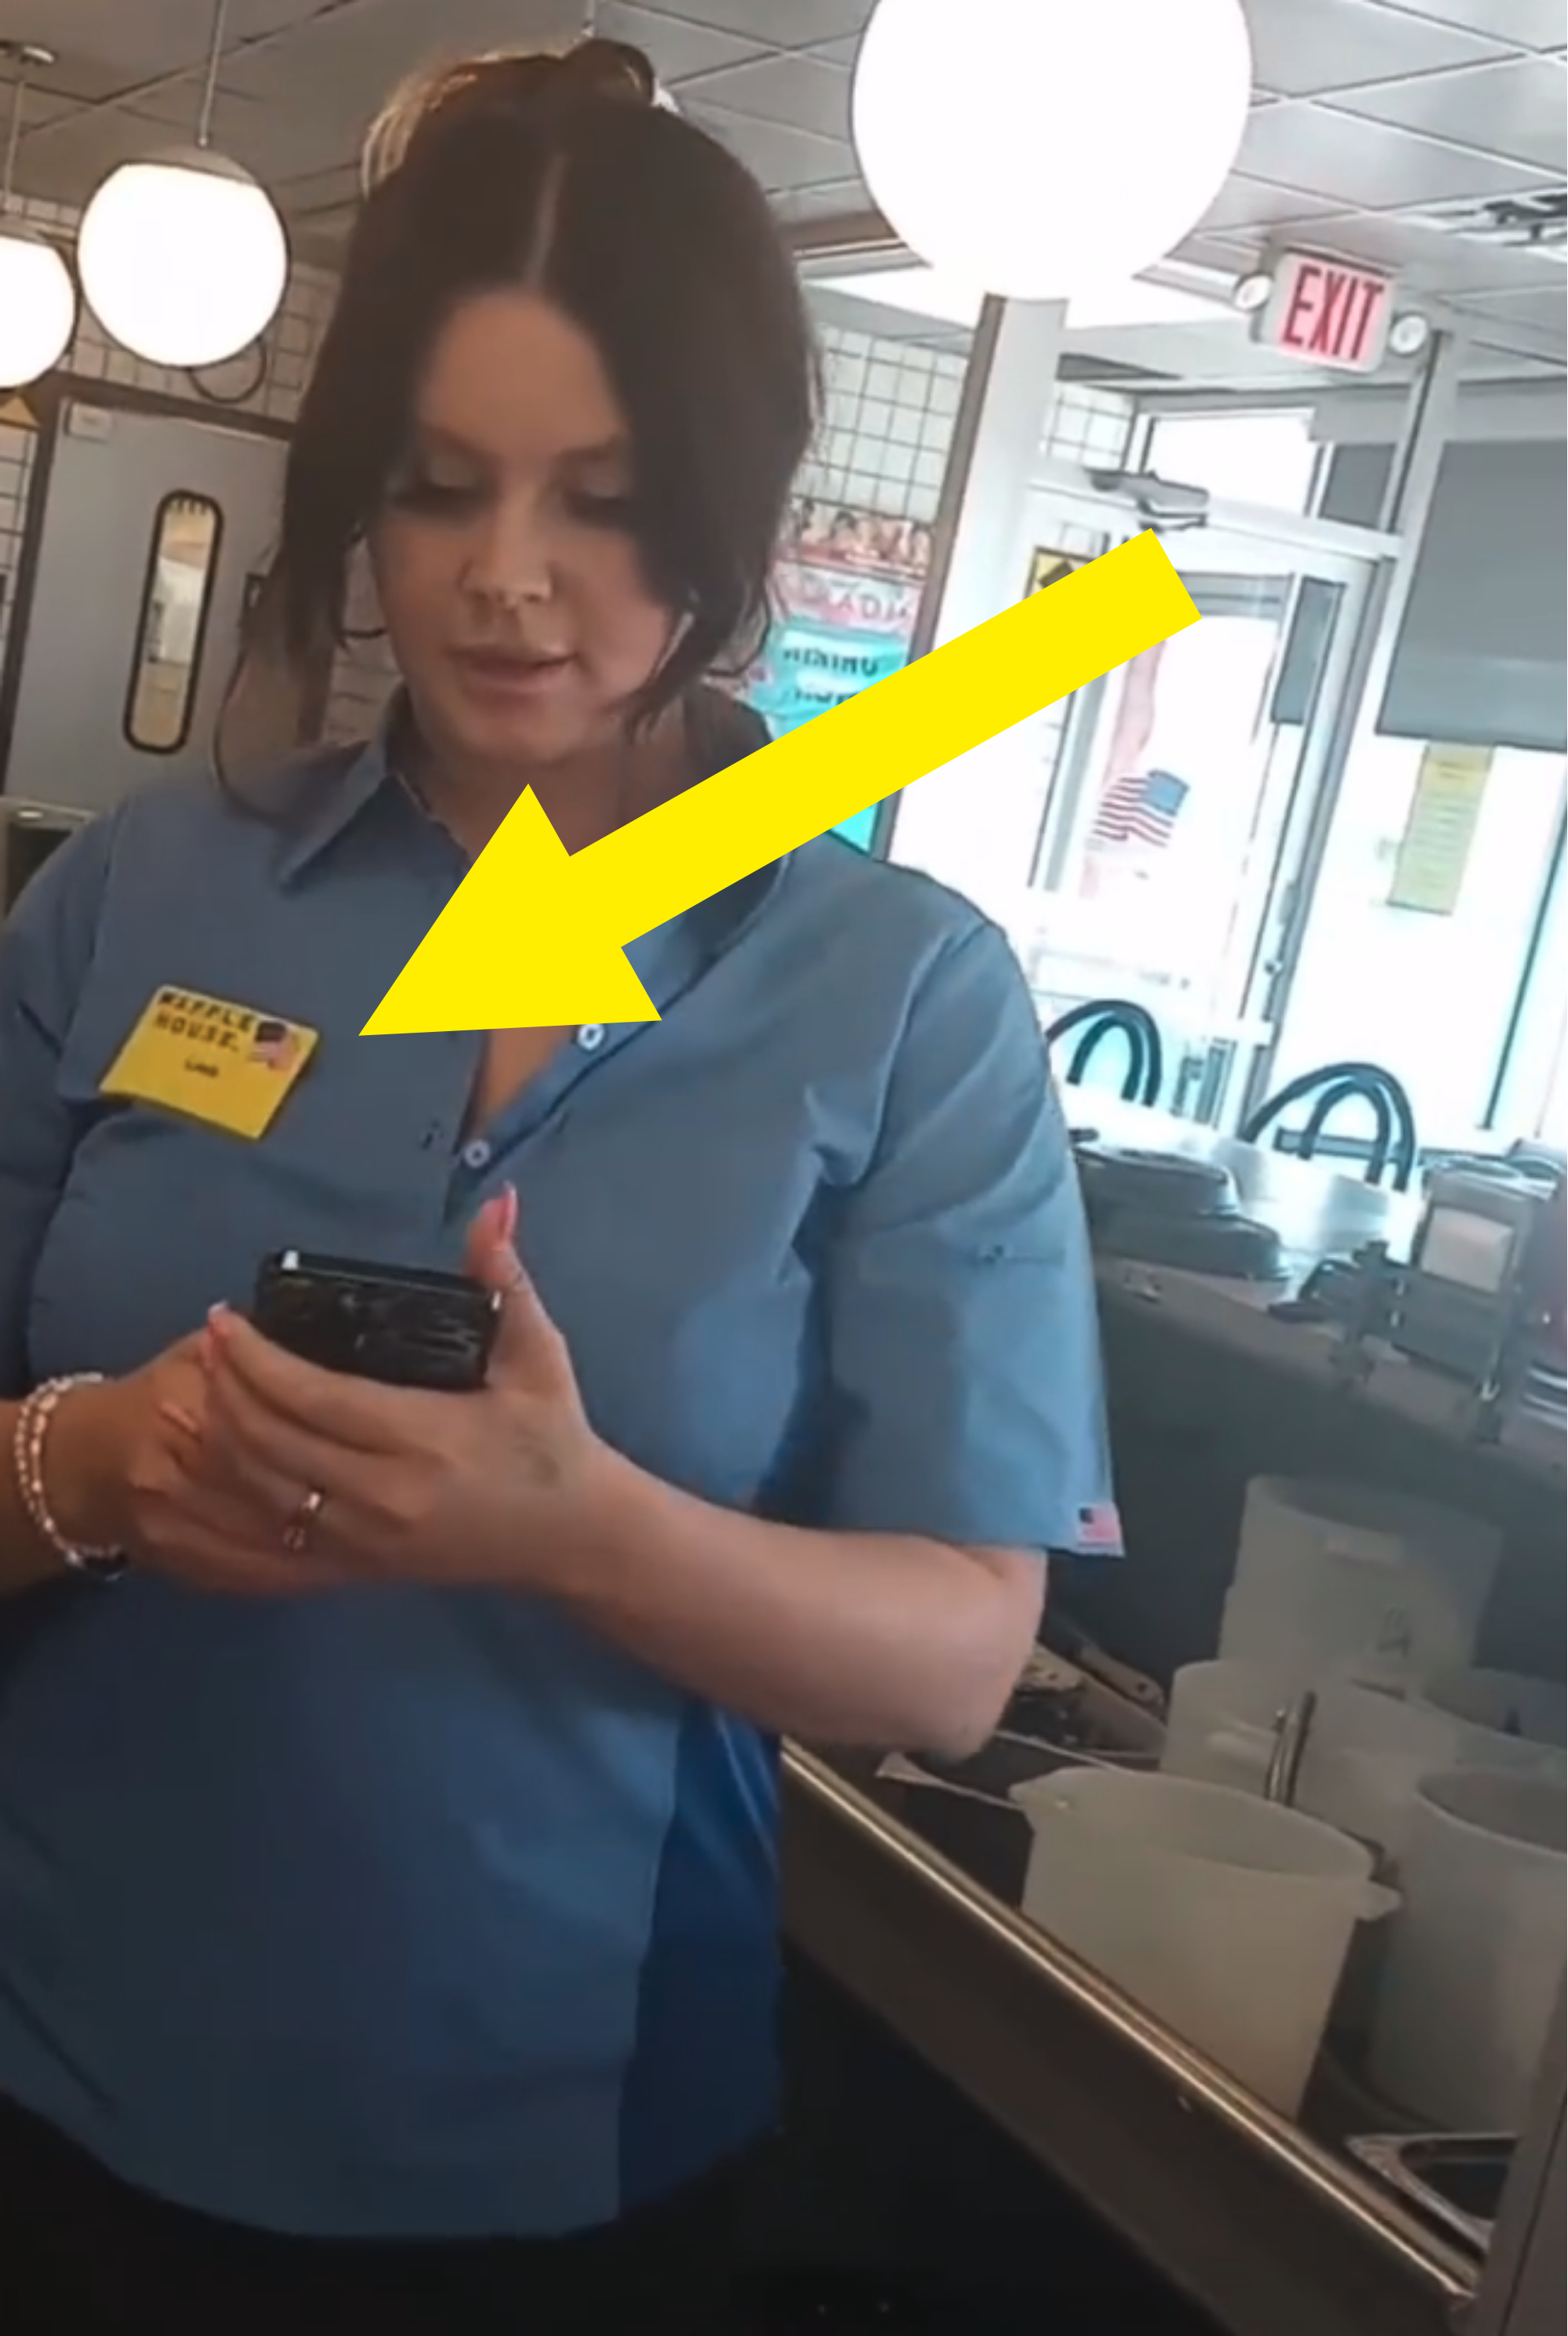 arrow pointing to the nametag on her shirt as she looks at her phone